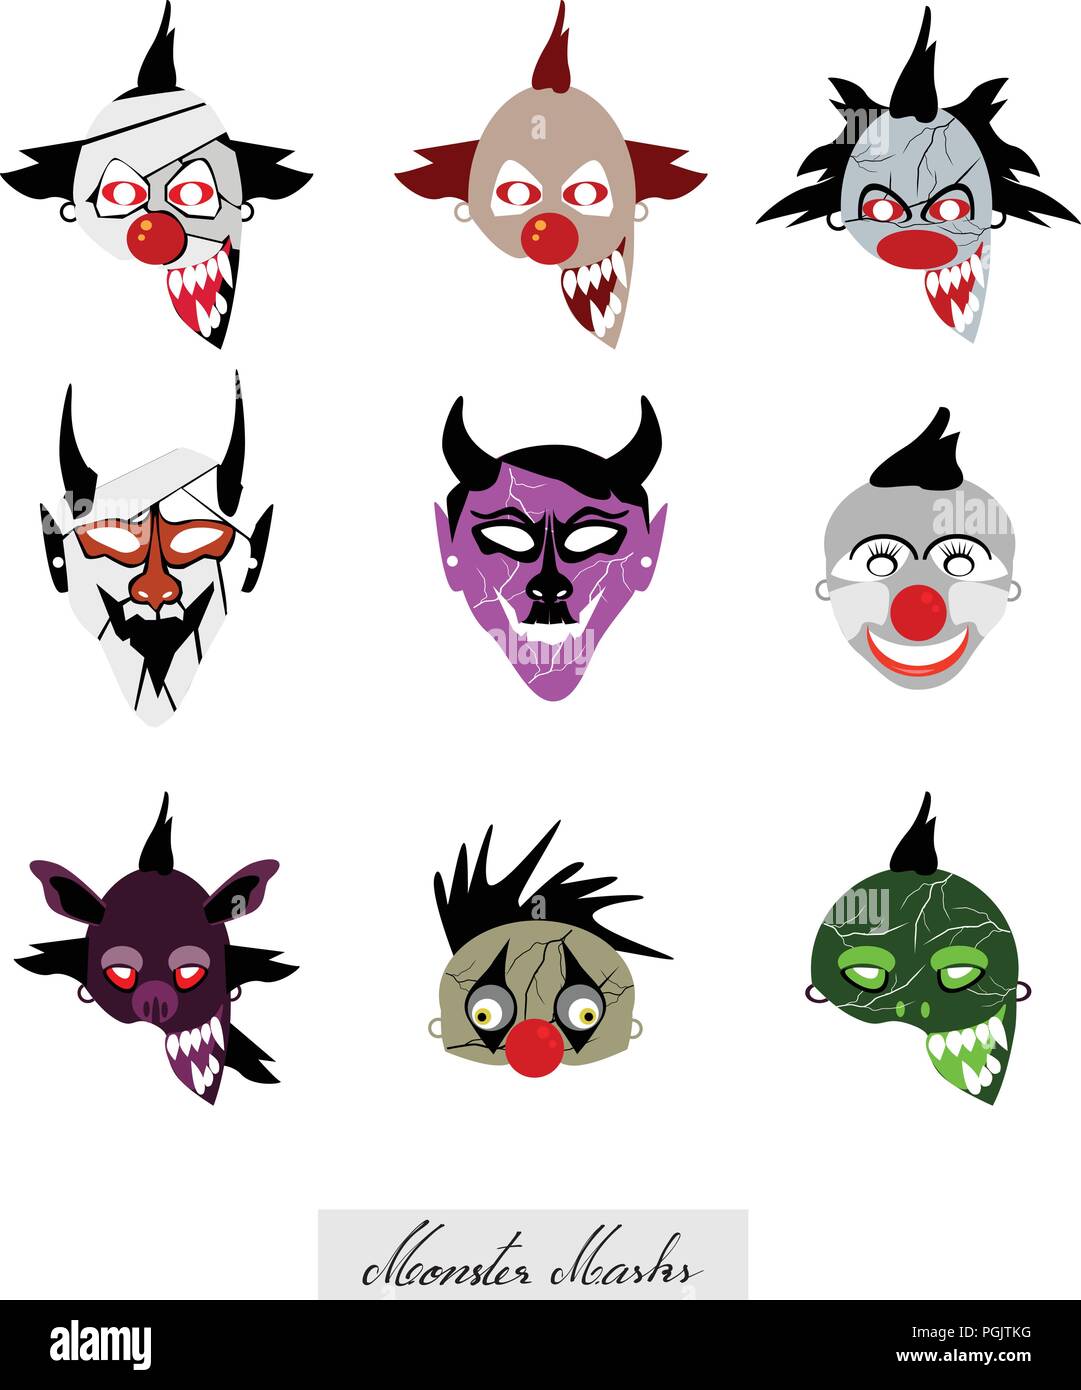 Holidays And Celebrations, Illustration Set of Devils, Monsters and Clowns Masks For Halloween Celebration Party. Stock Vector